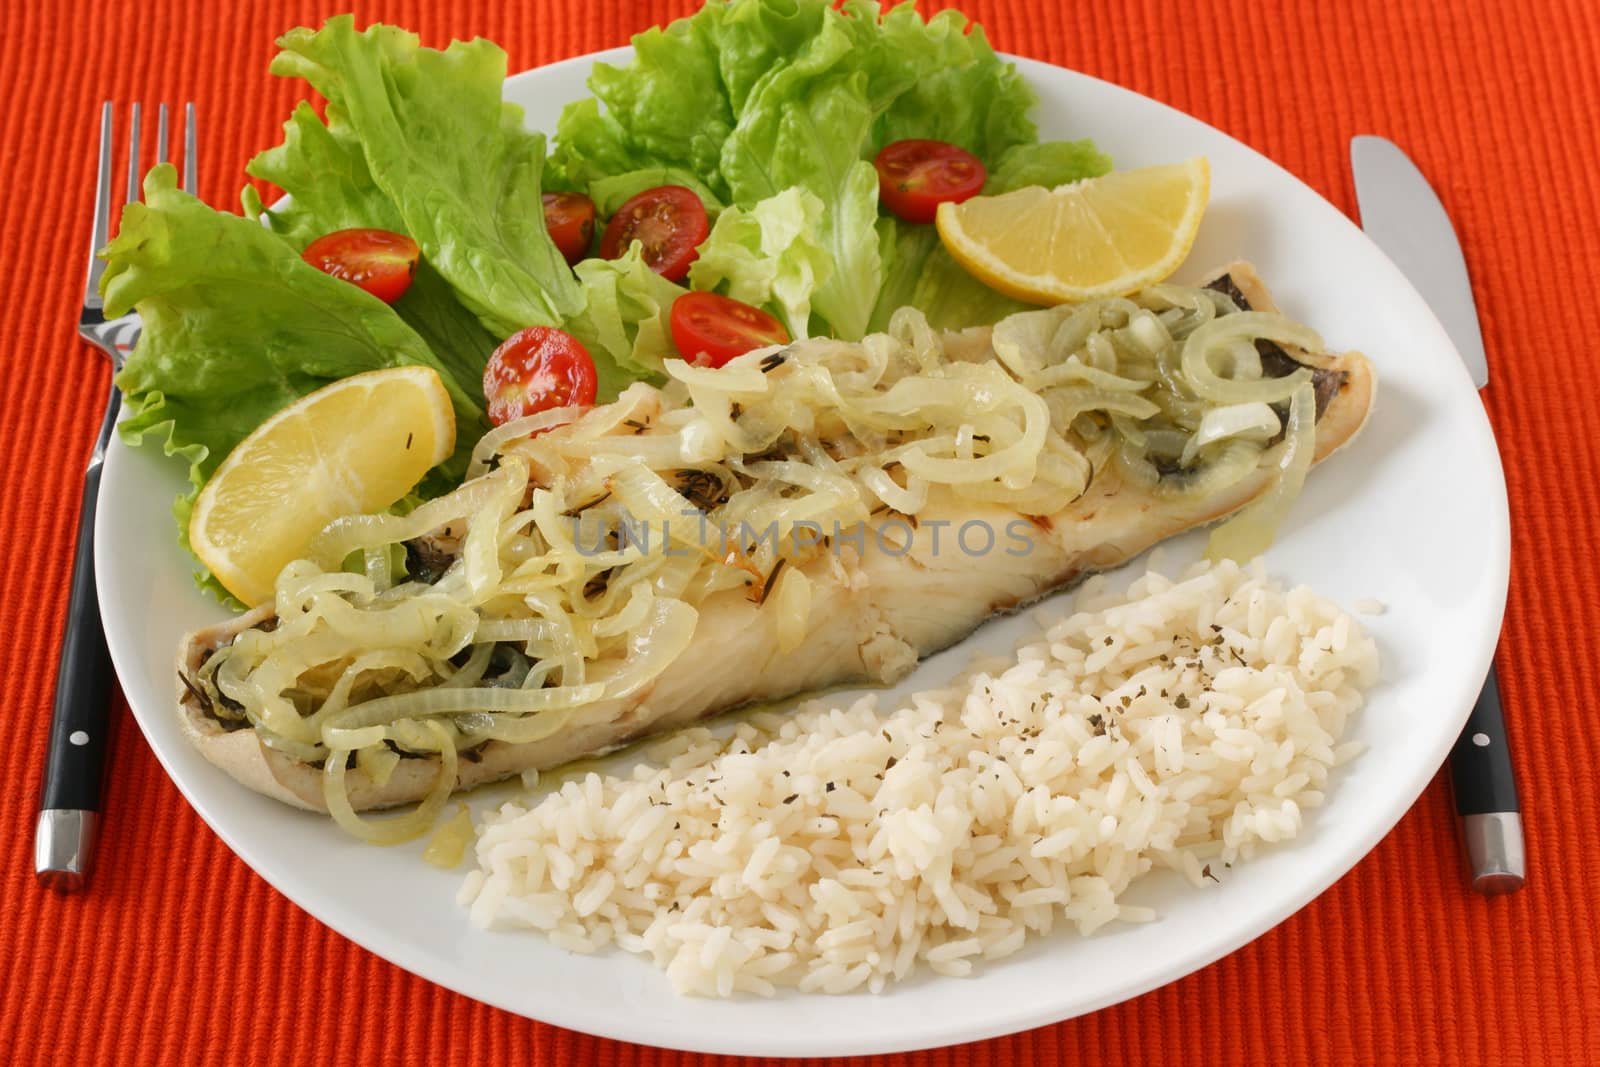 fried fish with salad and rice by nataliamylova